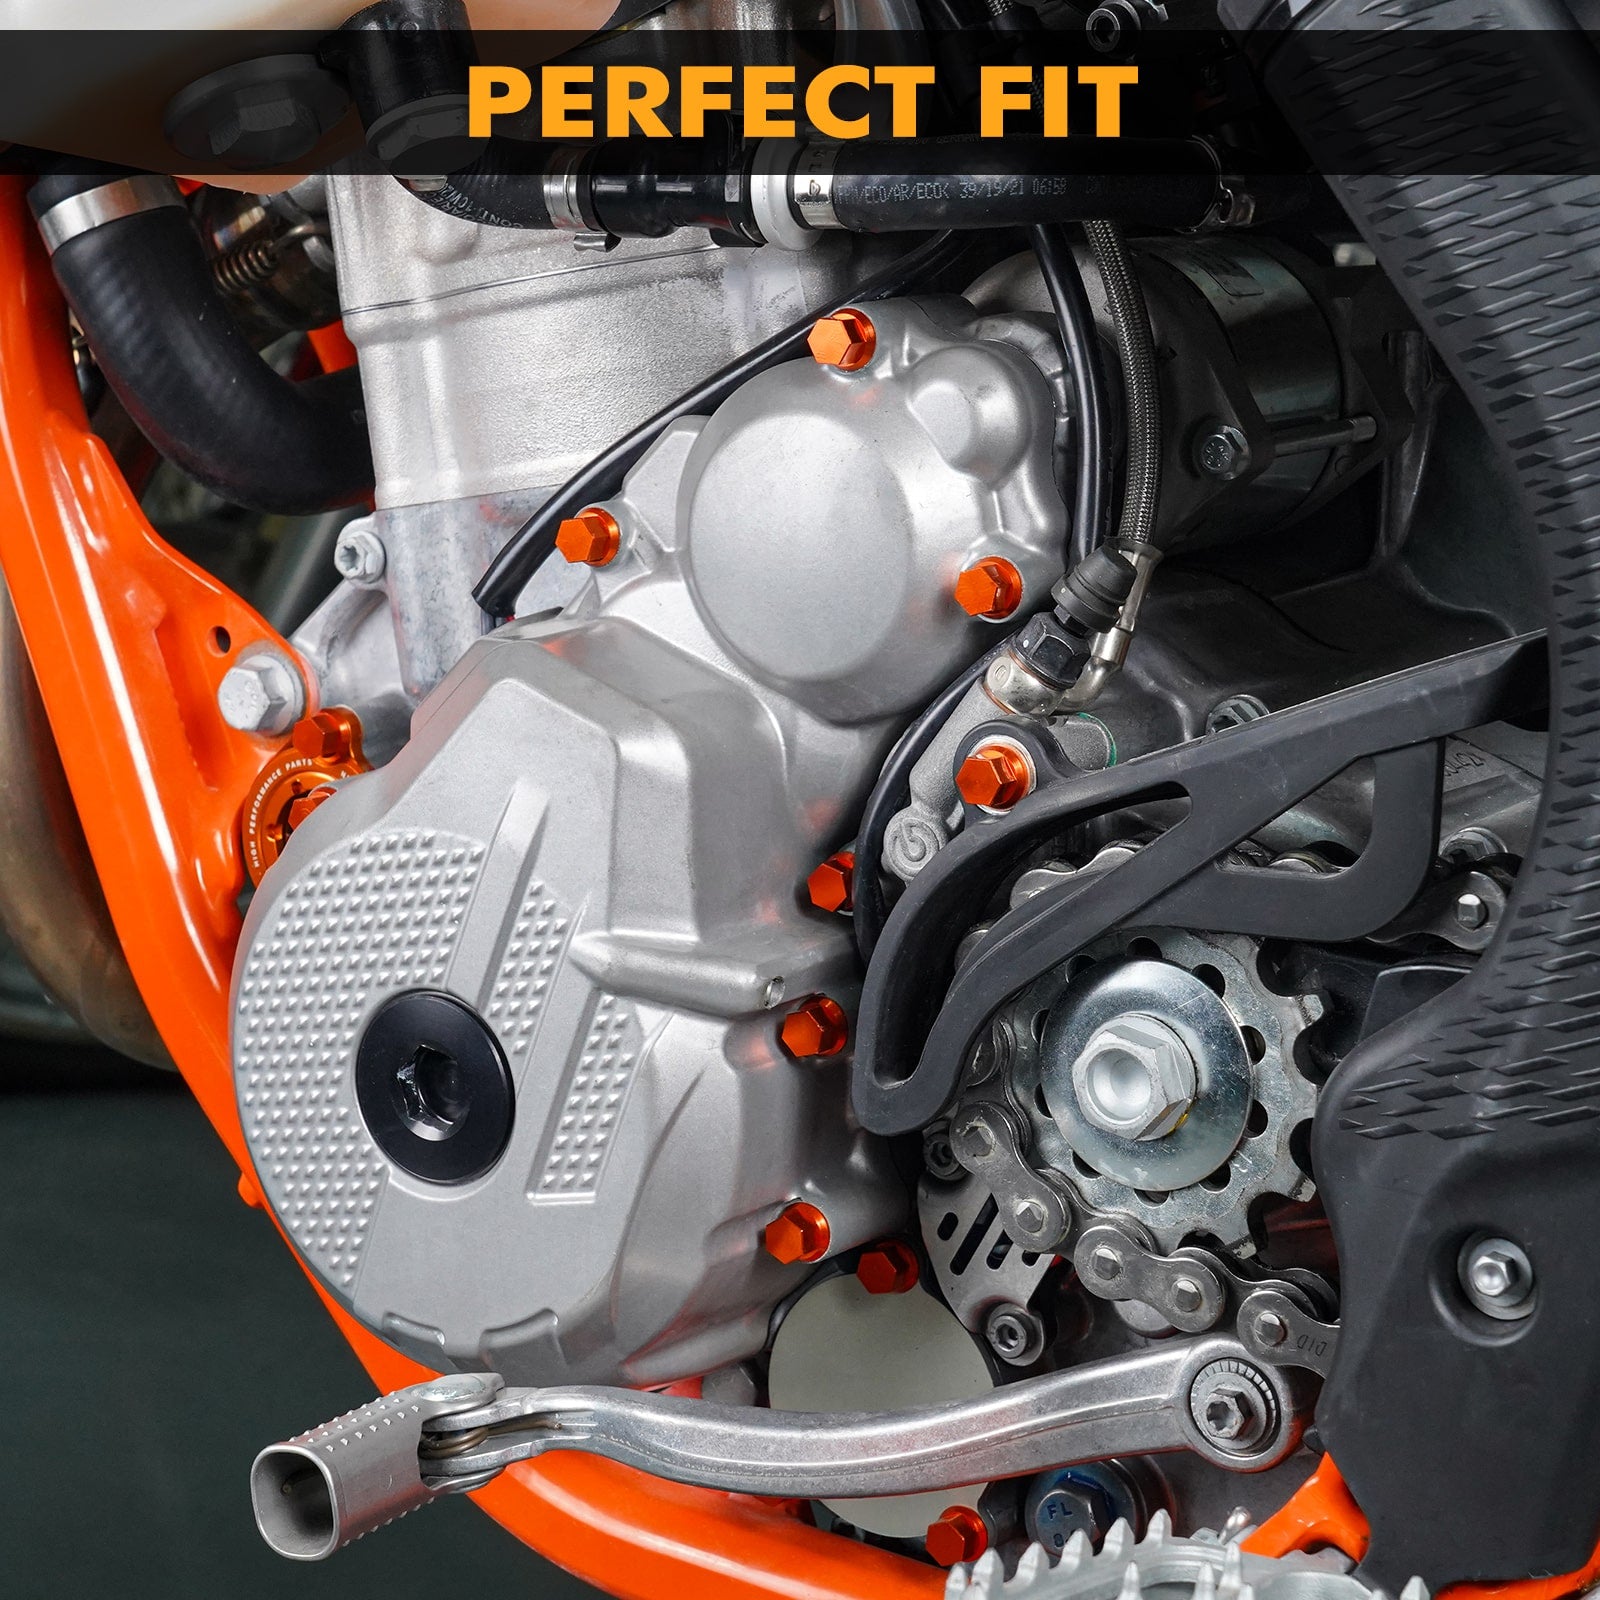 KTM 390 Duke Parts and accessories